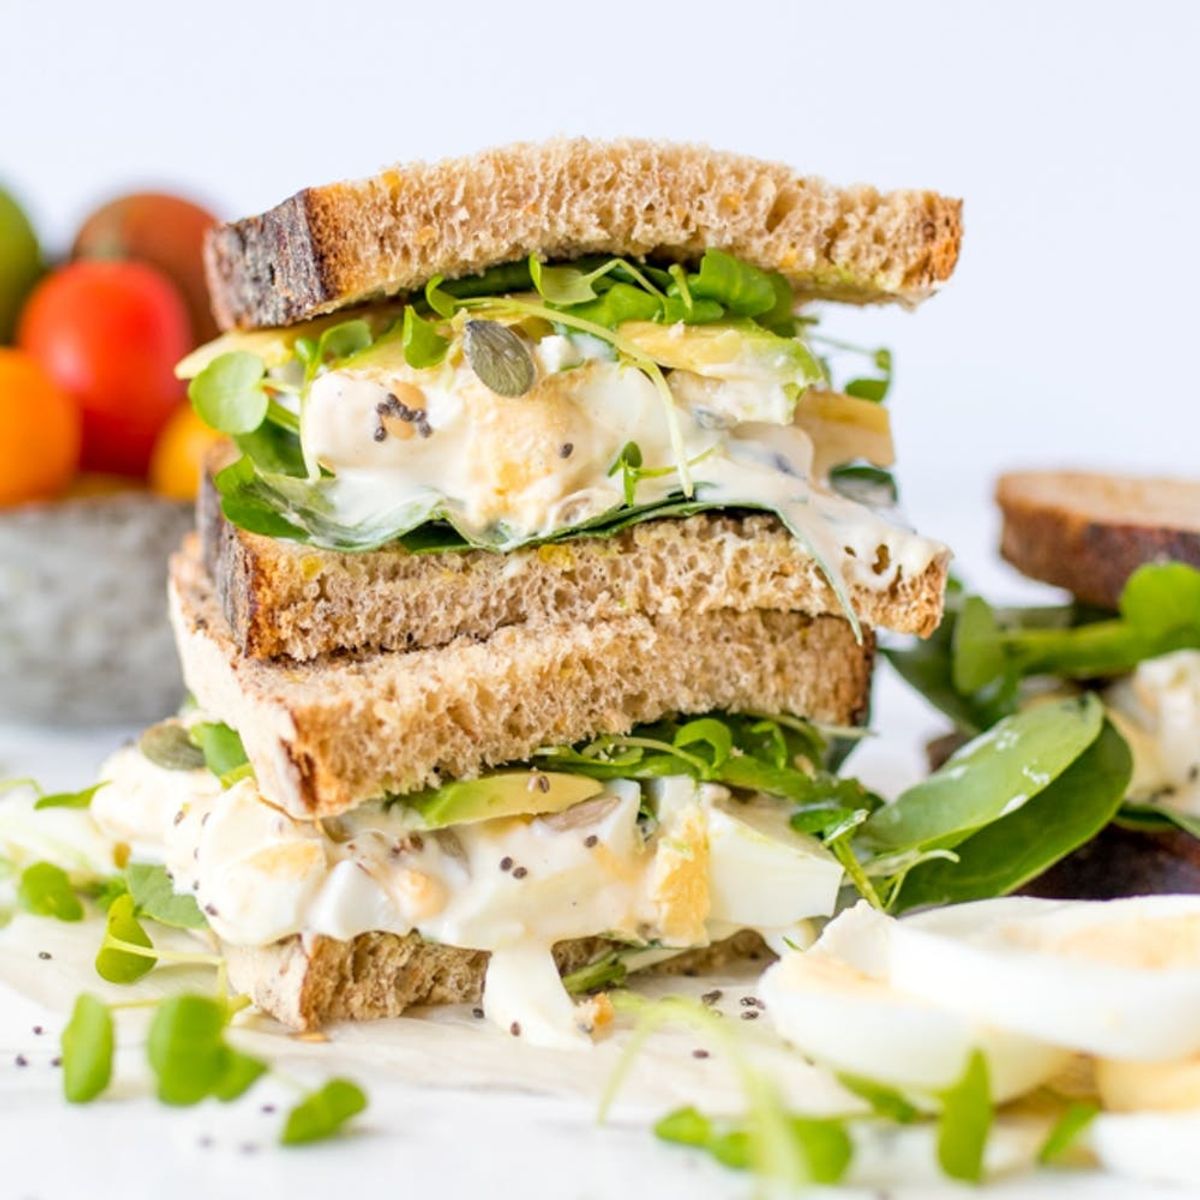 A Superfood Egg Sandwich That Satisfies That Comfort Food Craving